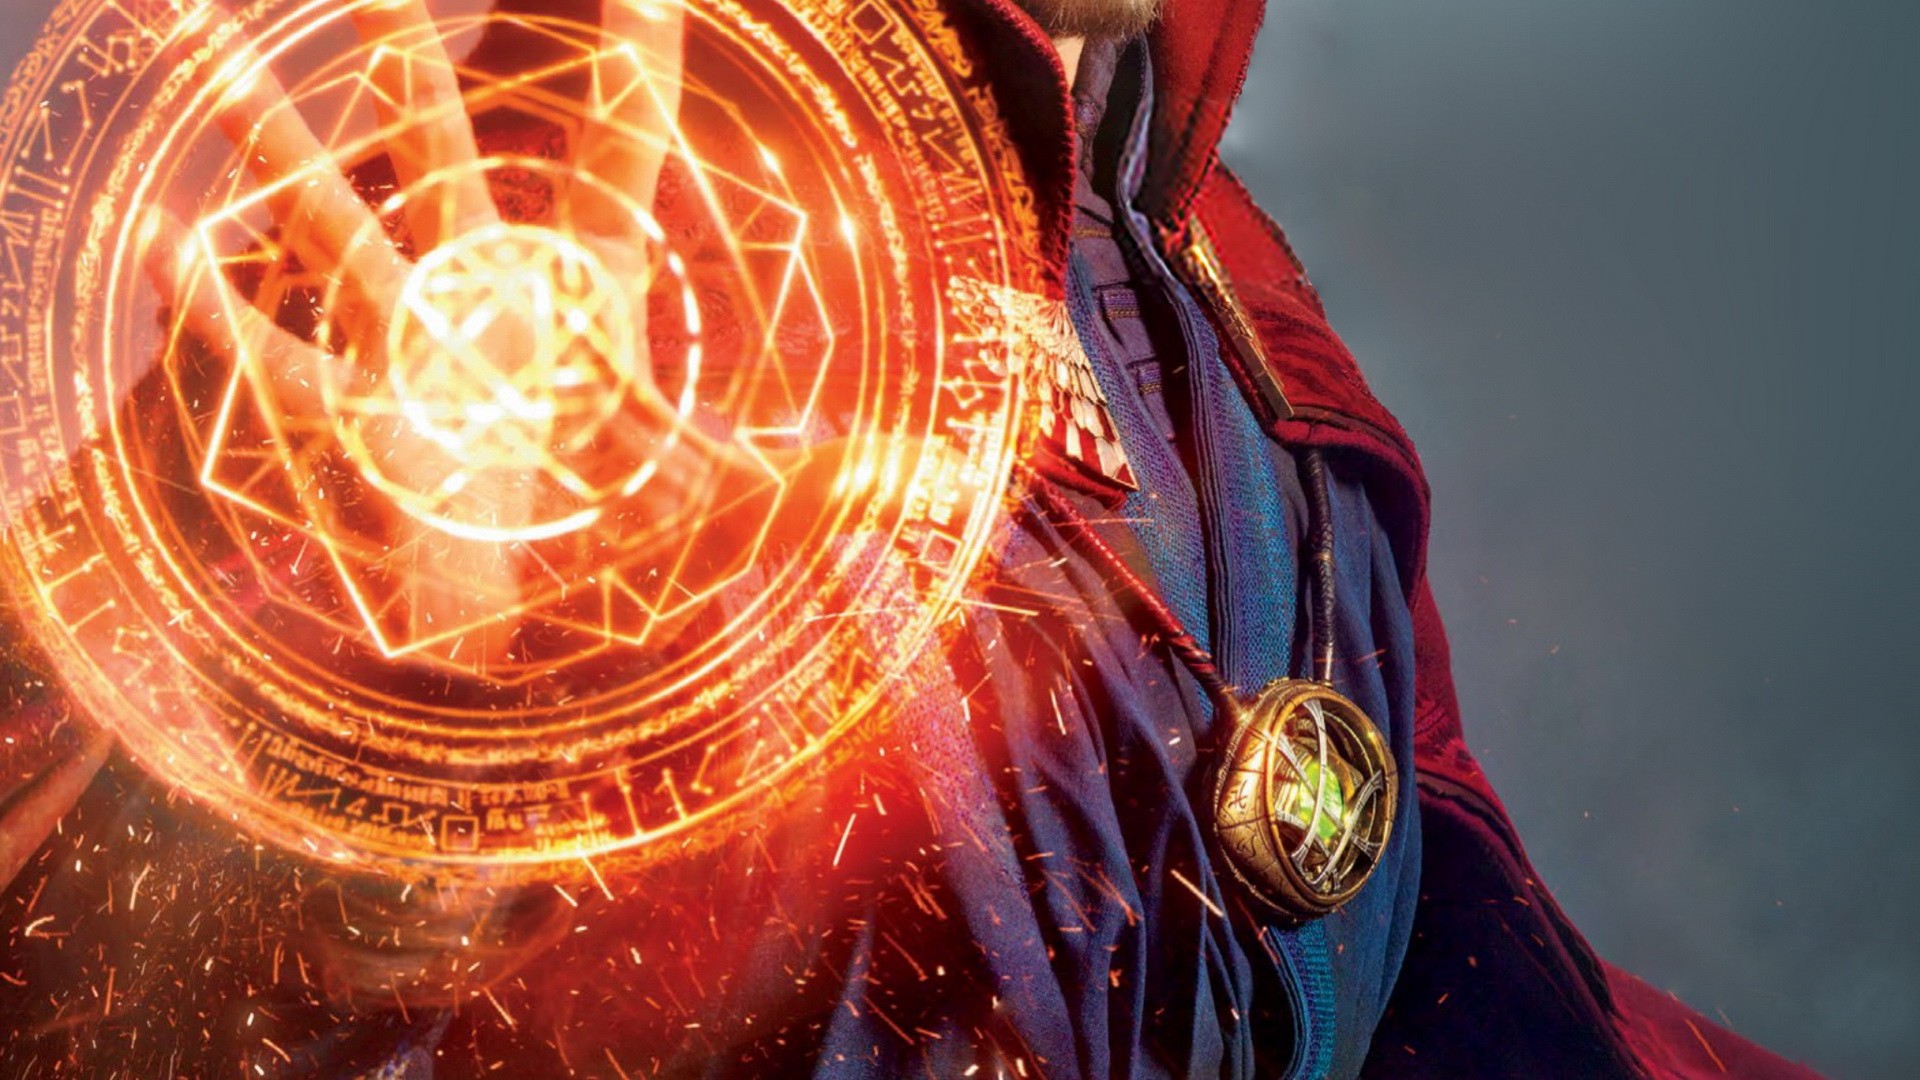 Doctor Strange wallpaper -① Download free awesome wallpapers